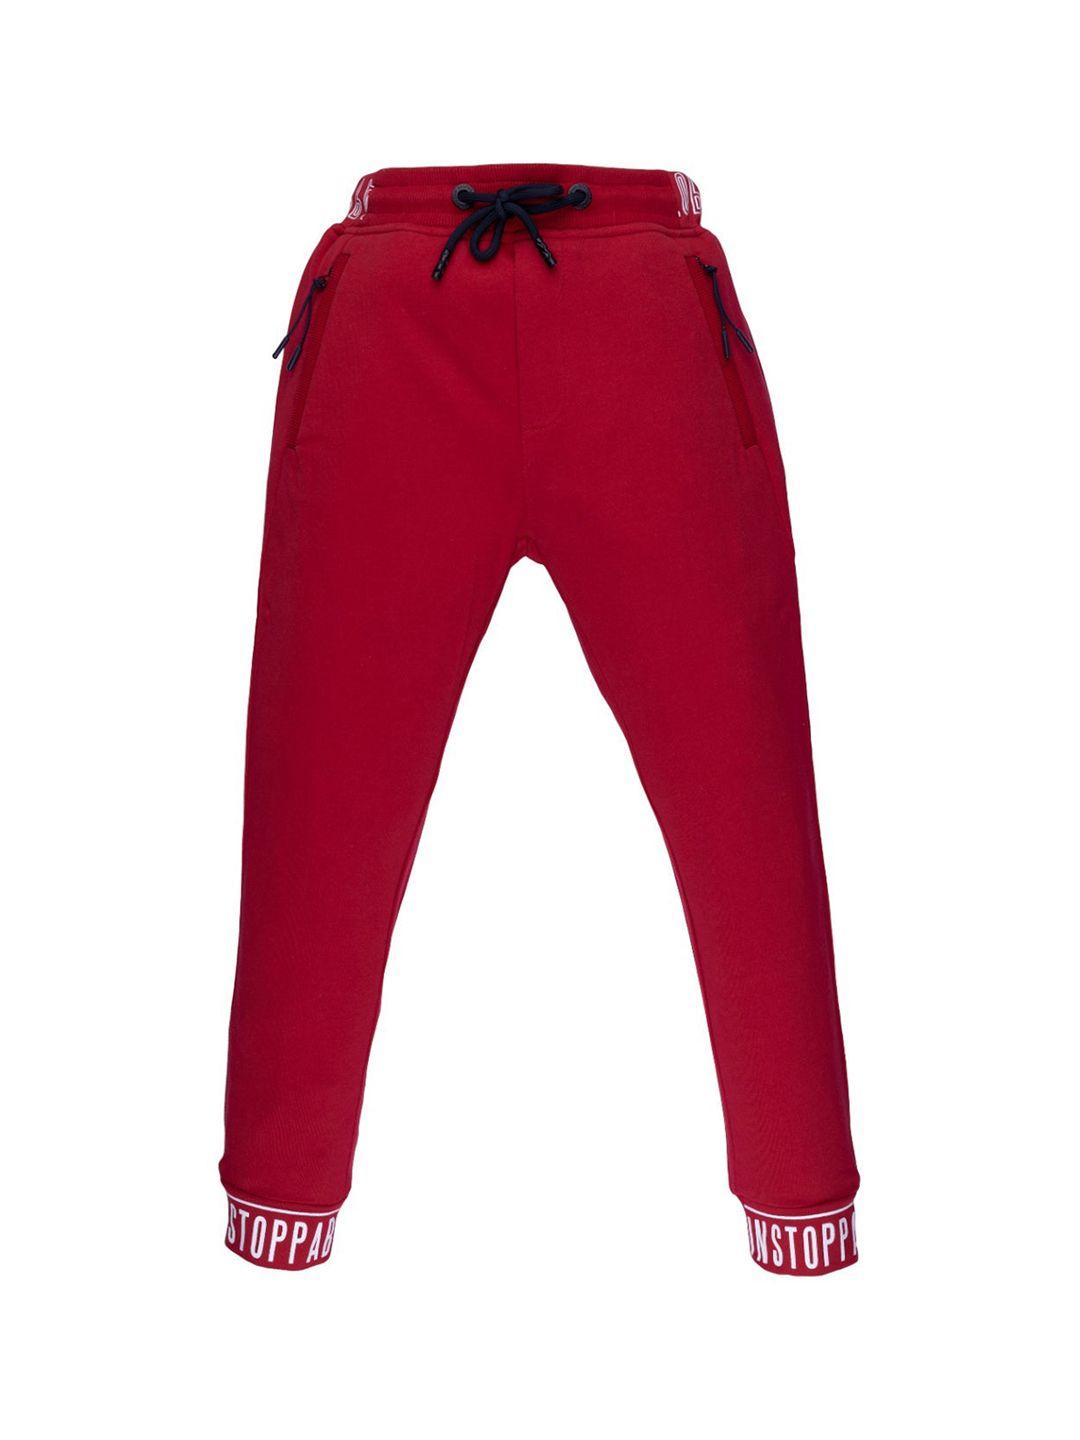 status quo boys red solid cotton joggers